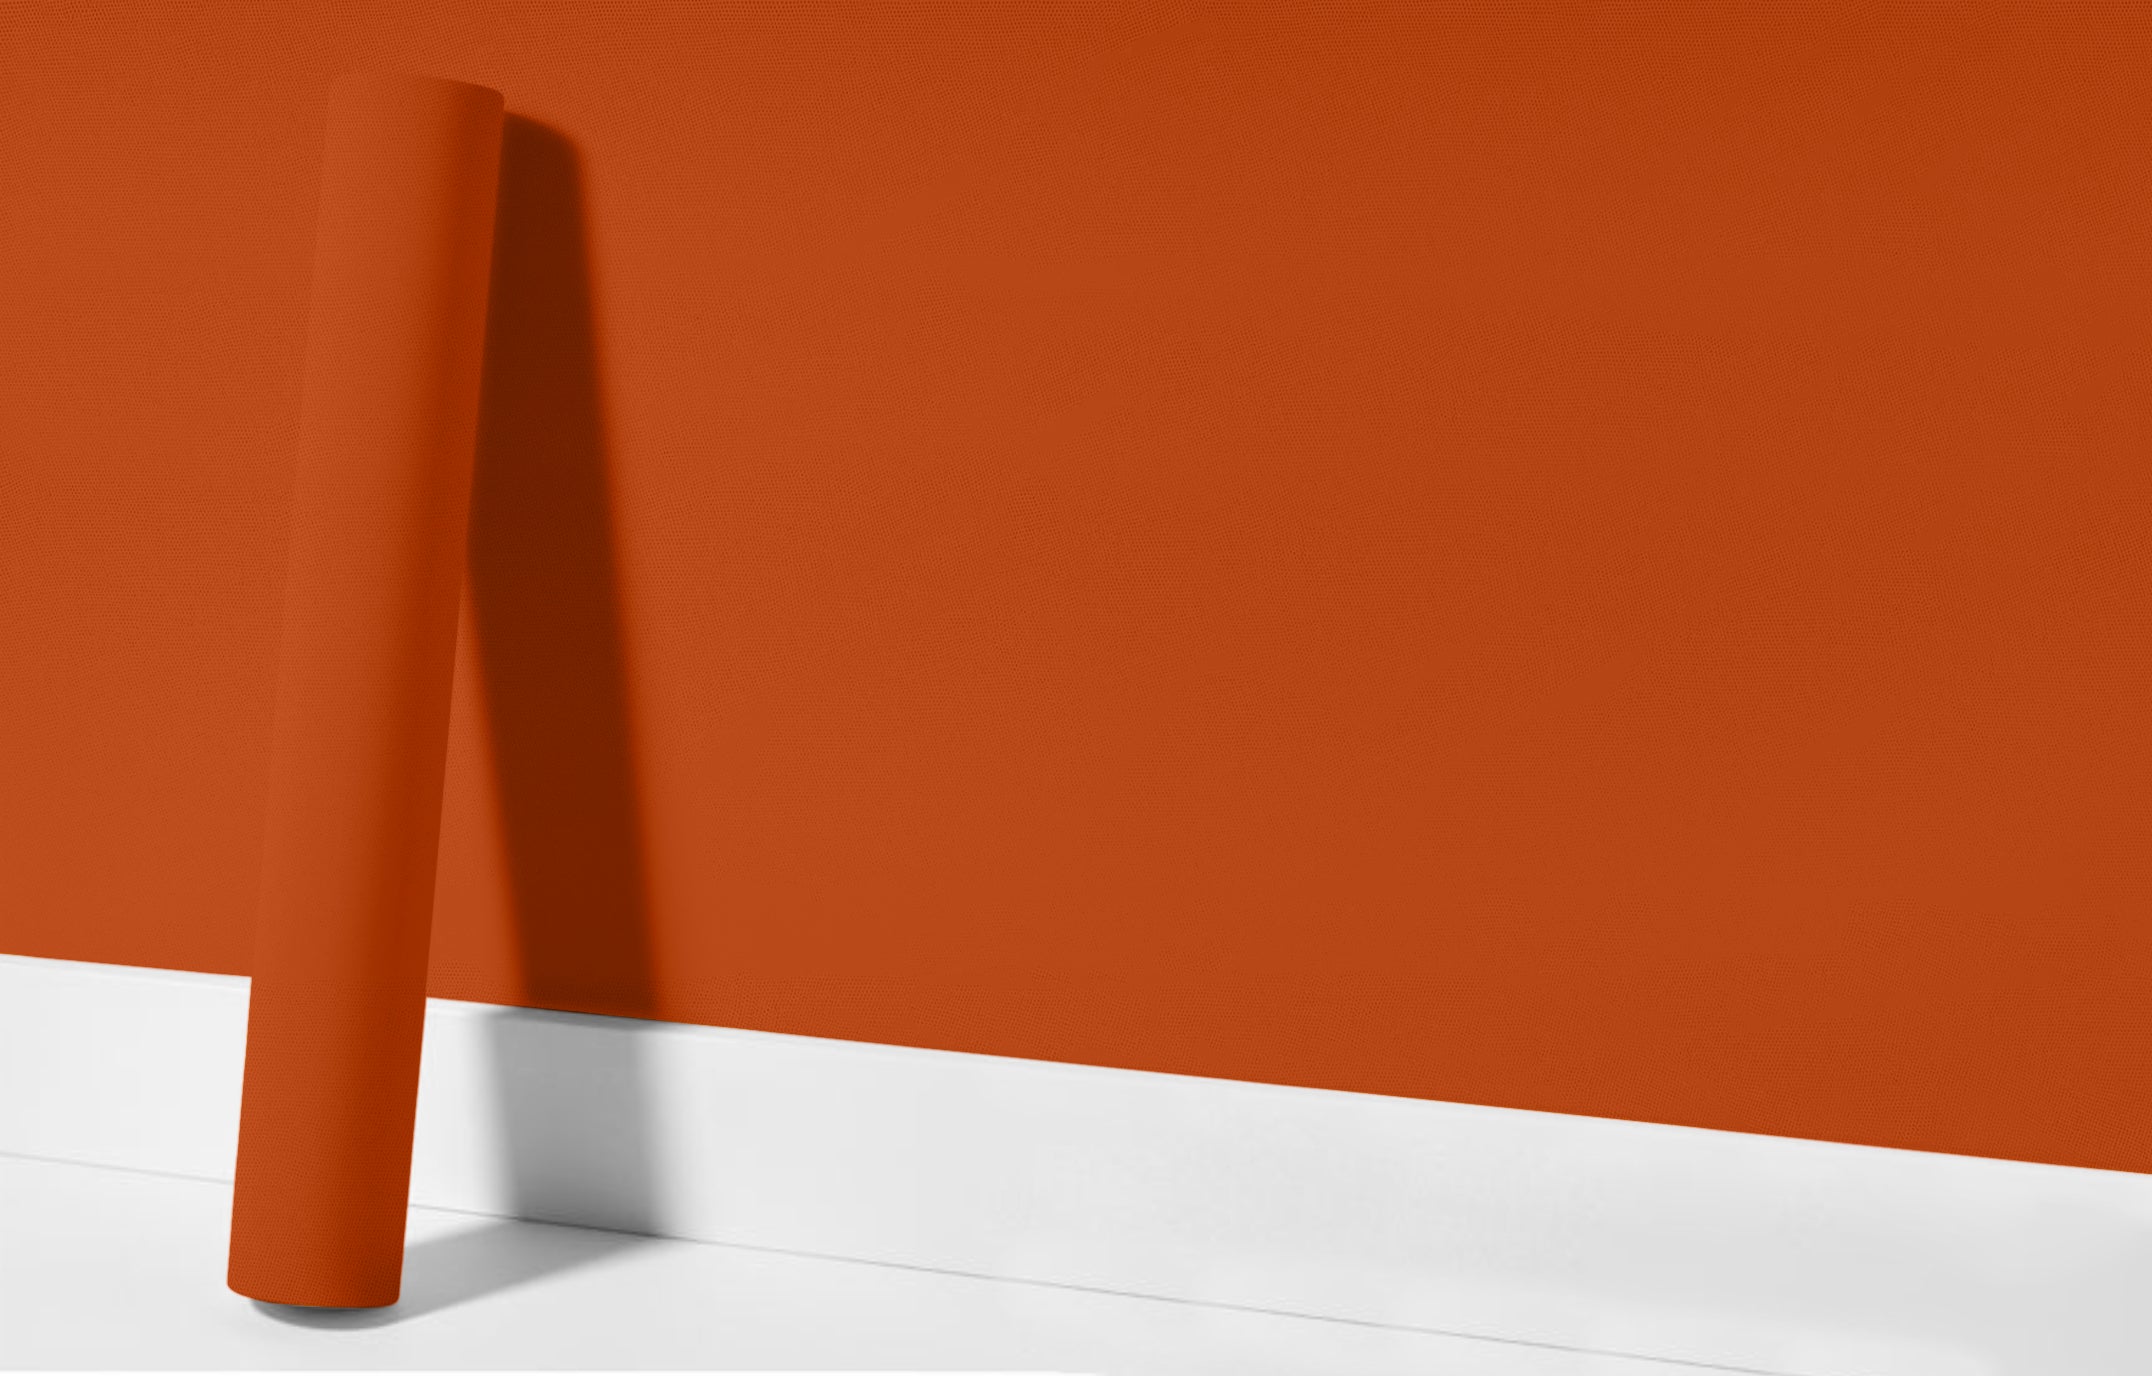 Peel & Stick Removable Re-usable Paint - Color RAL 2001 Red Orange - offRAL™ - RALRAW LLC, USA